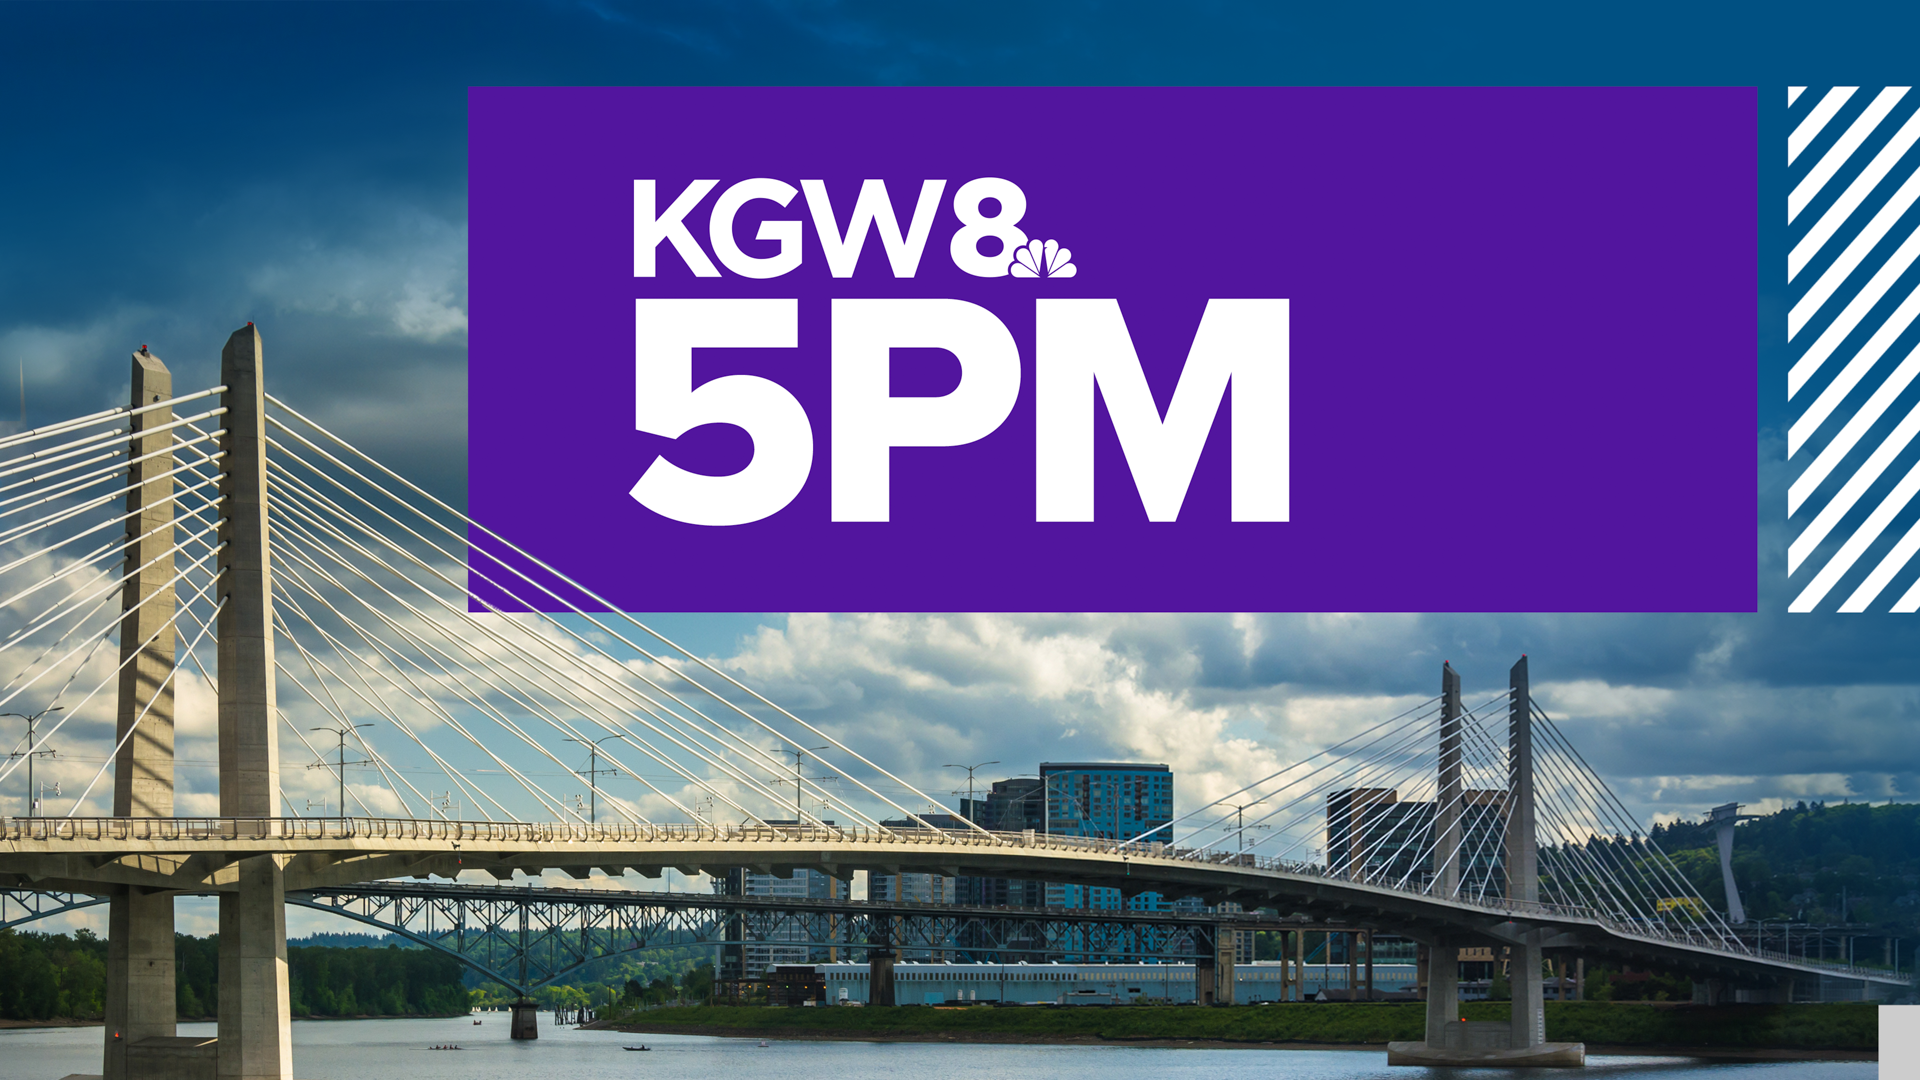 KGW Top Stories: 5 p.m., Wednesday, Sept. 28, 2022